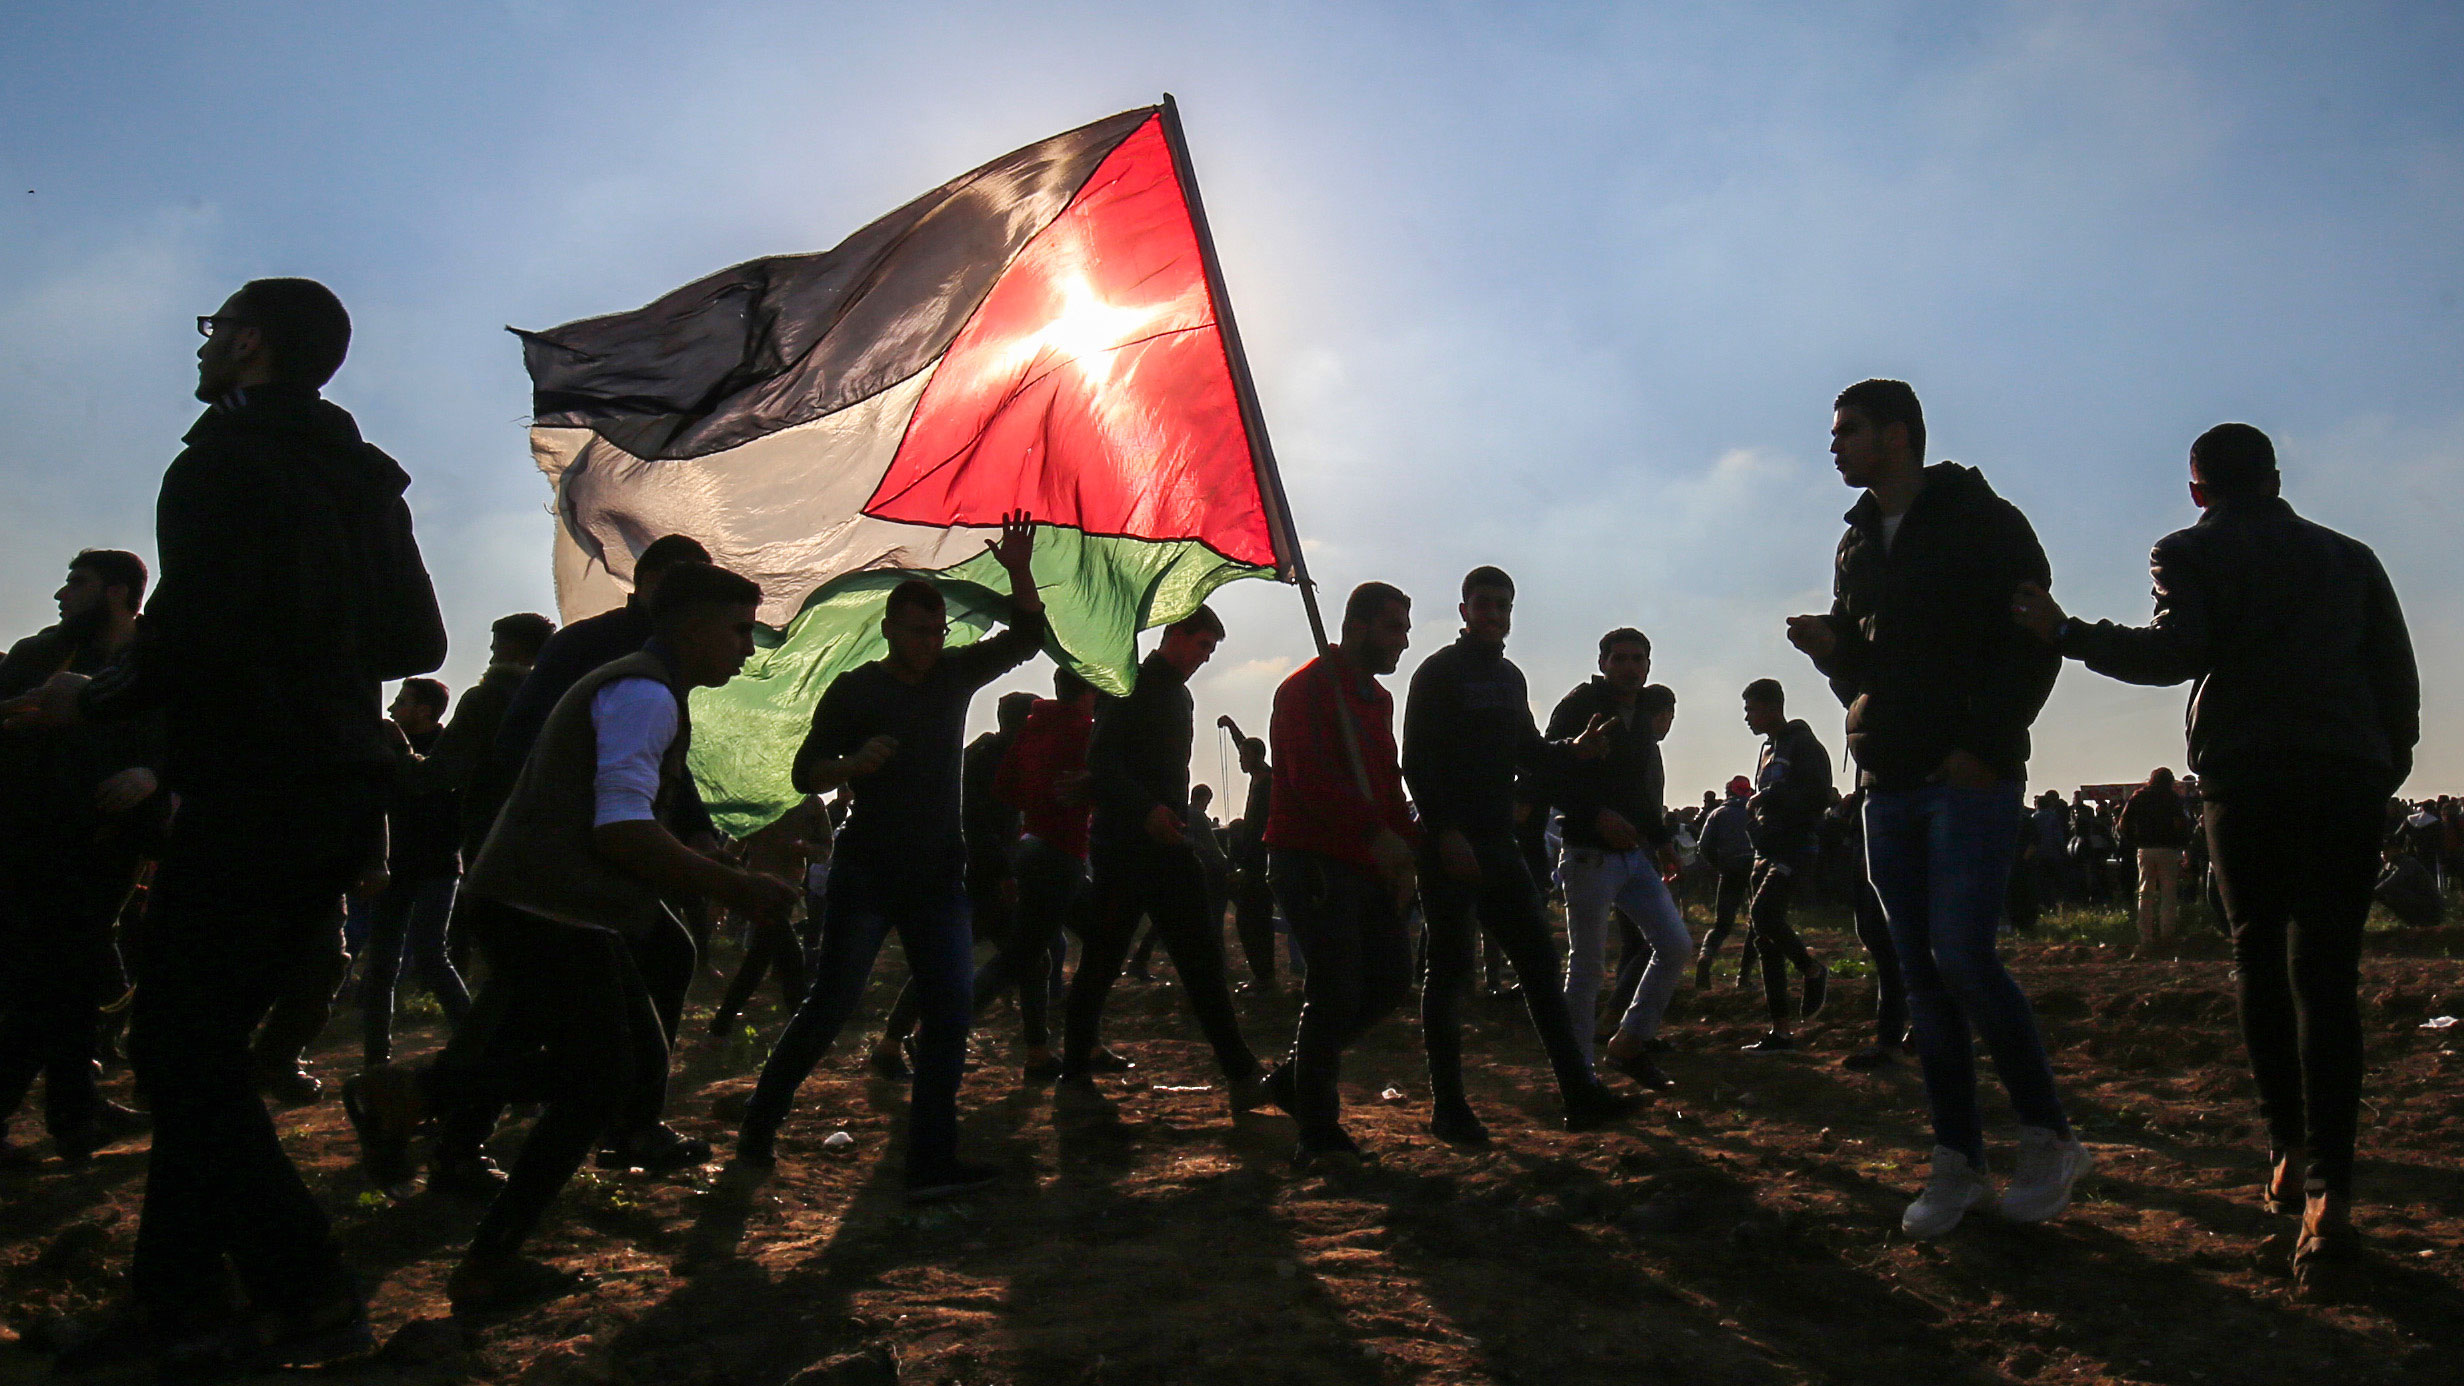 Palestinian&nbsp;protesters march with a Palestinian flag during a demonstration at the border fence with Israel in Gaza&nbsp;on March 22.